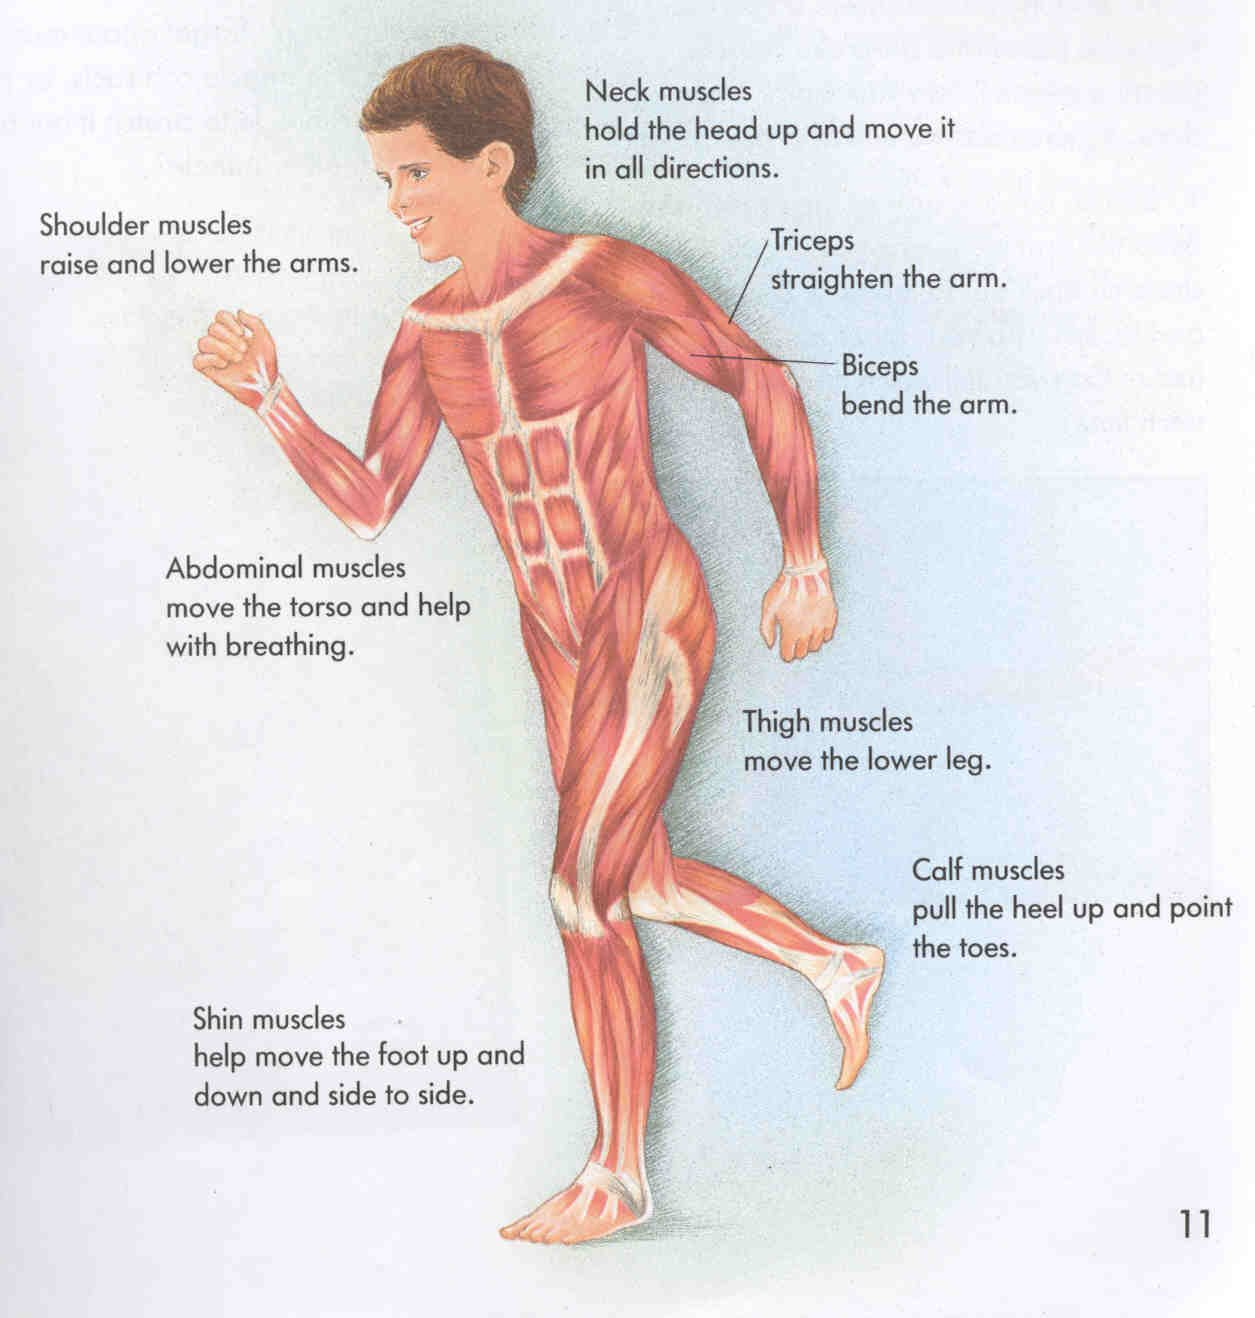 Muscle Names Worksheets  Isaiahrobledo1's Blog With Muscle Worksheets For Kids